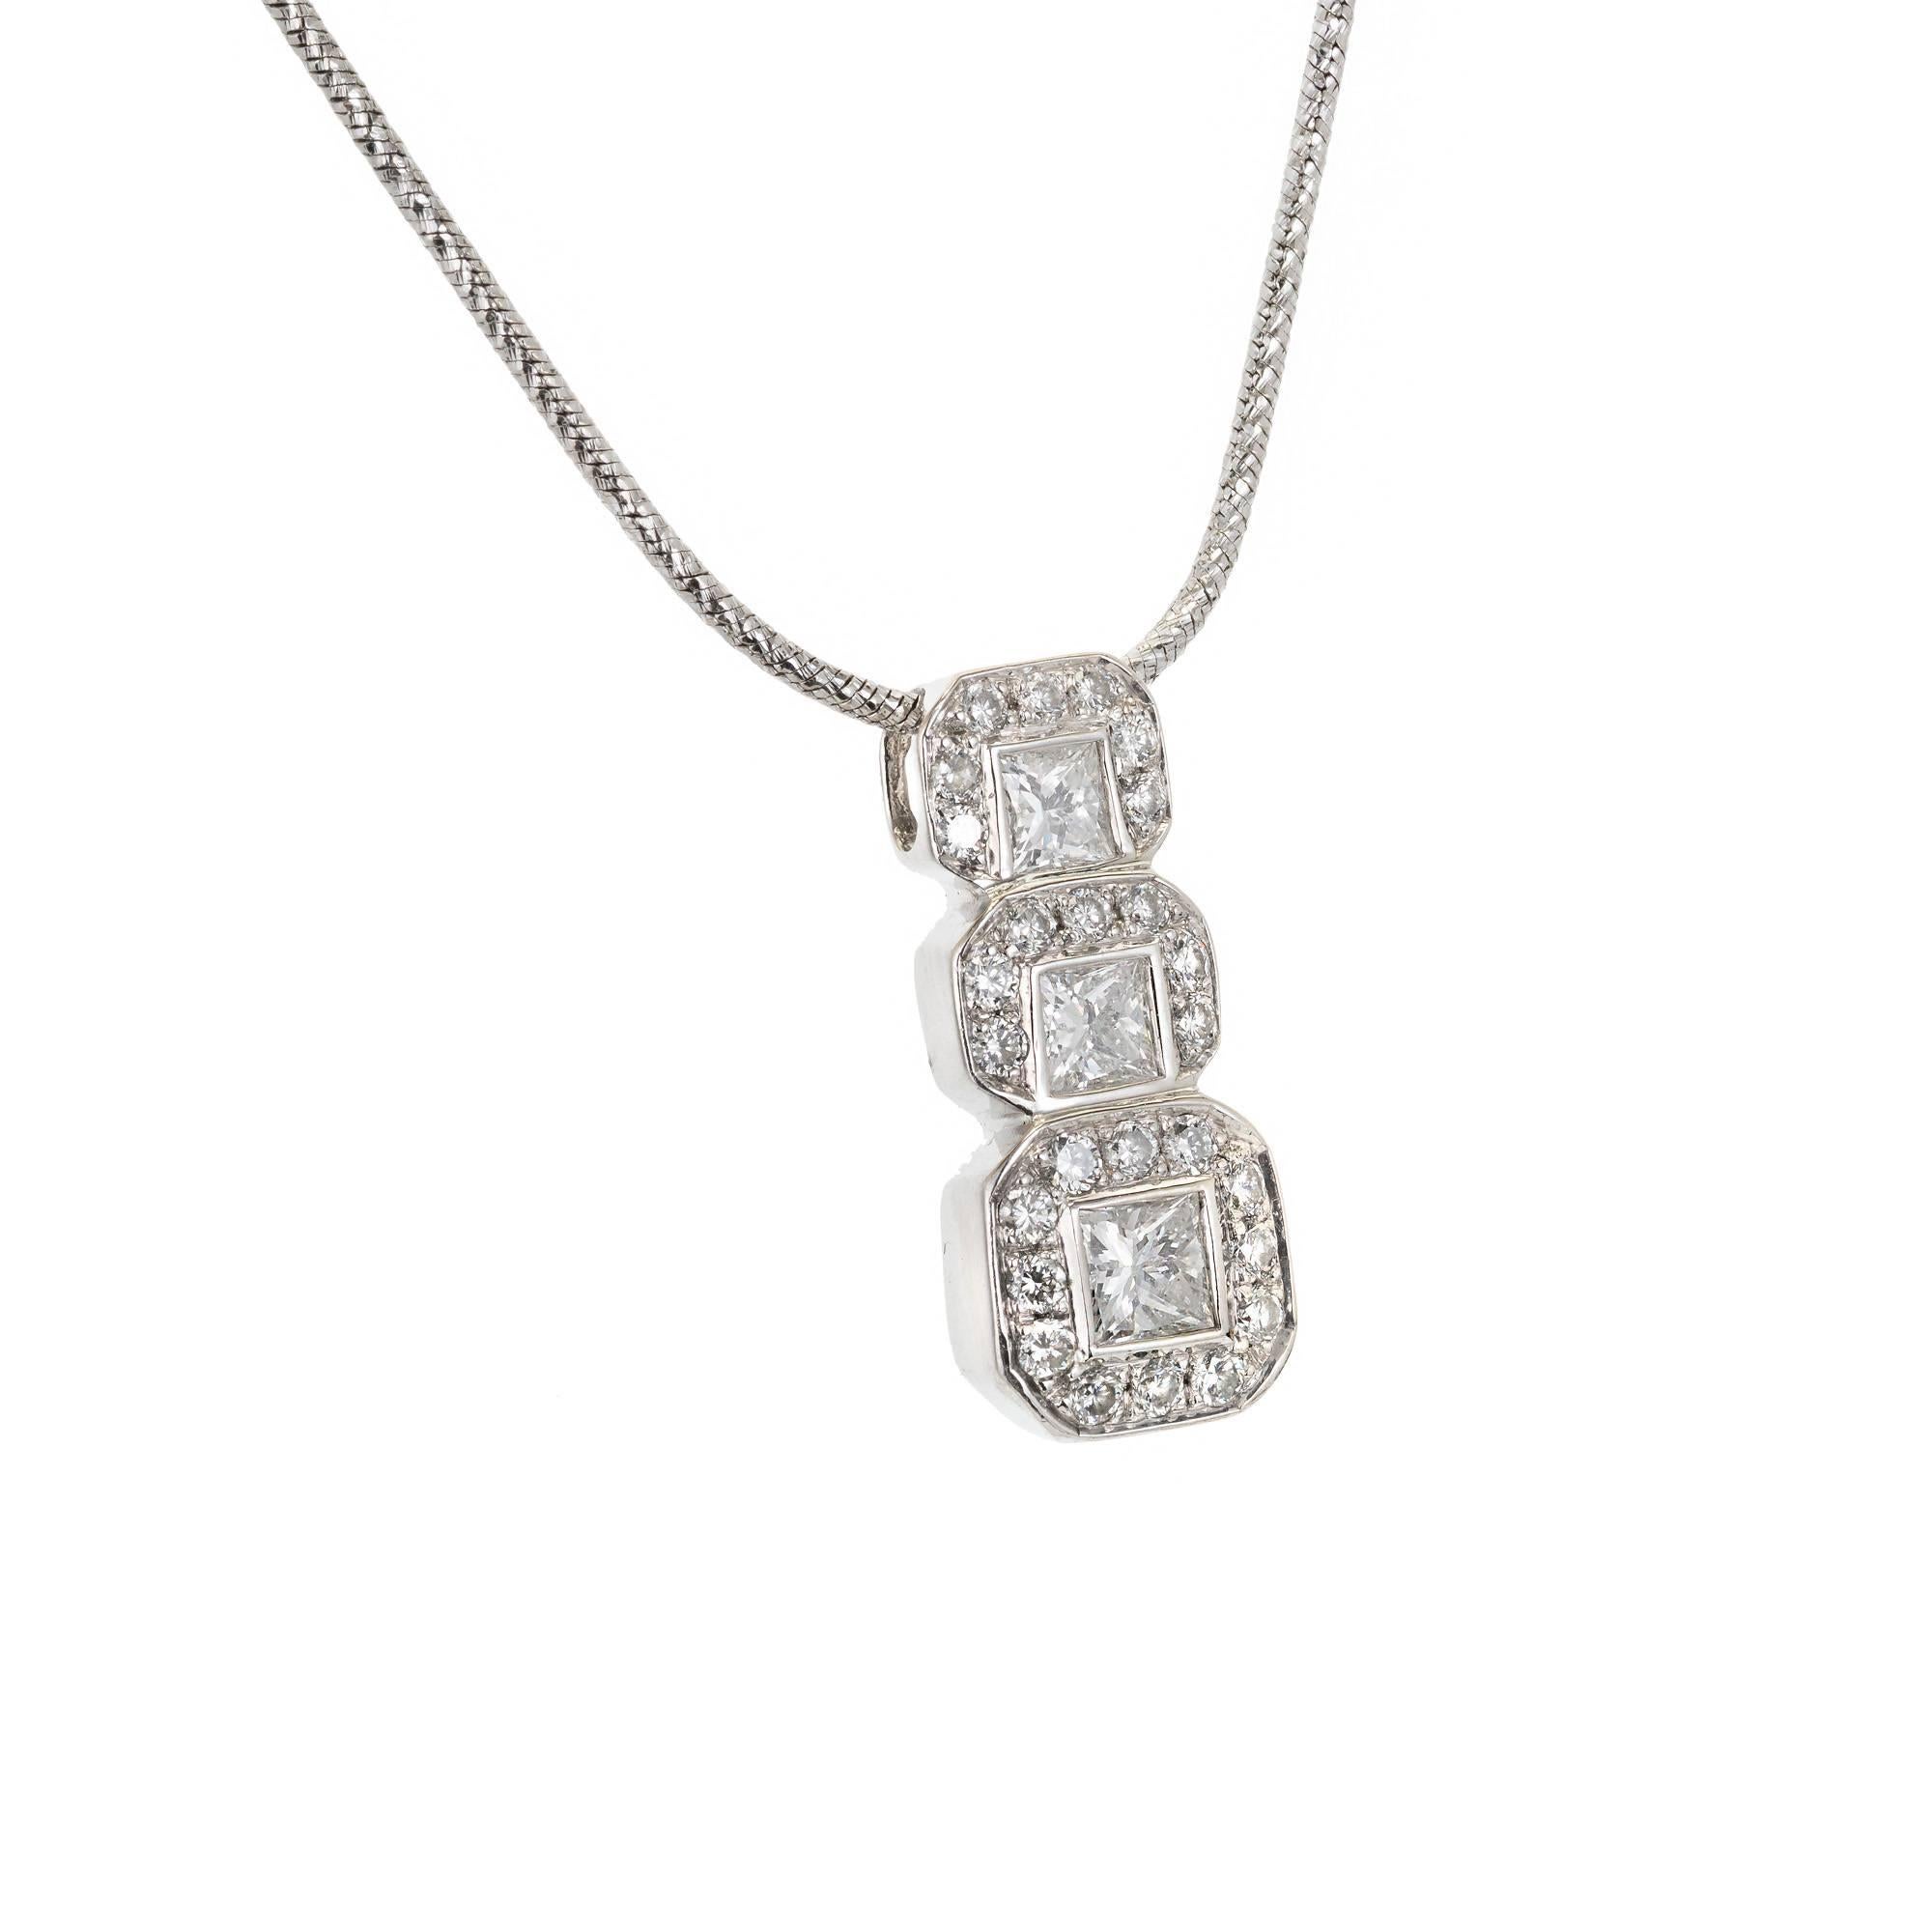 Princess and round full cut Diamond pendant Necklace on an 18-inch chain. All 14k white gold.

3 Princess cut Diamonds, approx. total weight .37cts, H, SI, 2.3 – 3.3mm
26 full cut Diamonds, approx. total weight .13cts, H, SI
14k white gold
Tested: